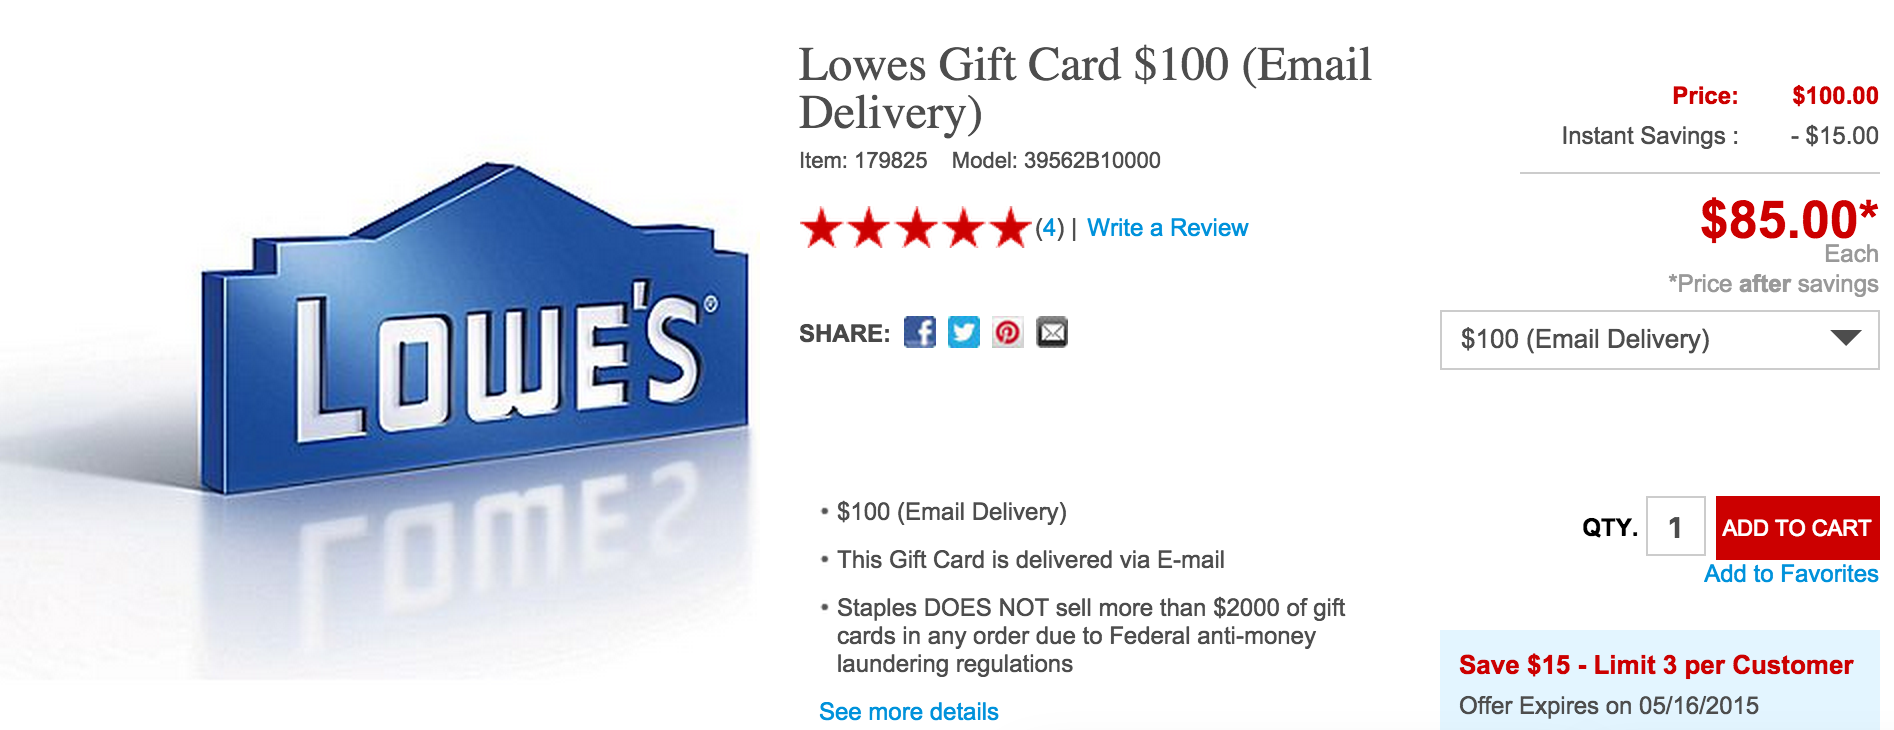 lowes-100-gift-card-email-delivery-85-at-staples